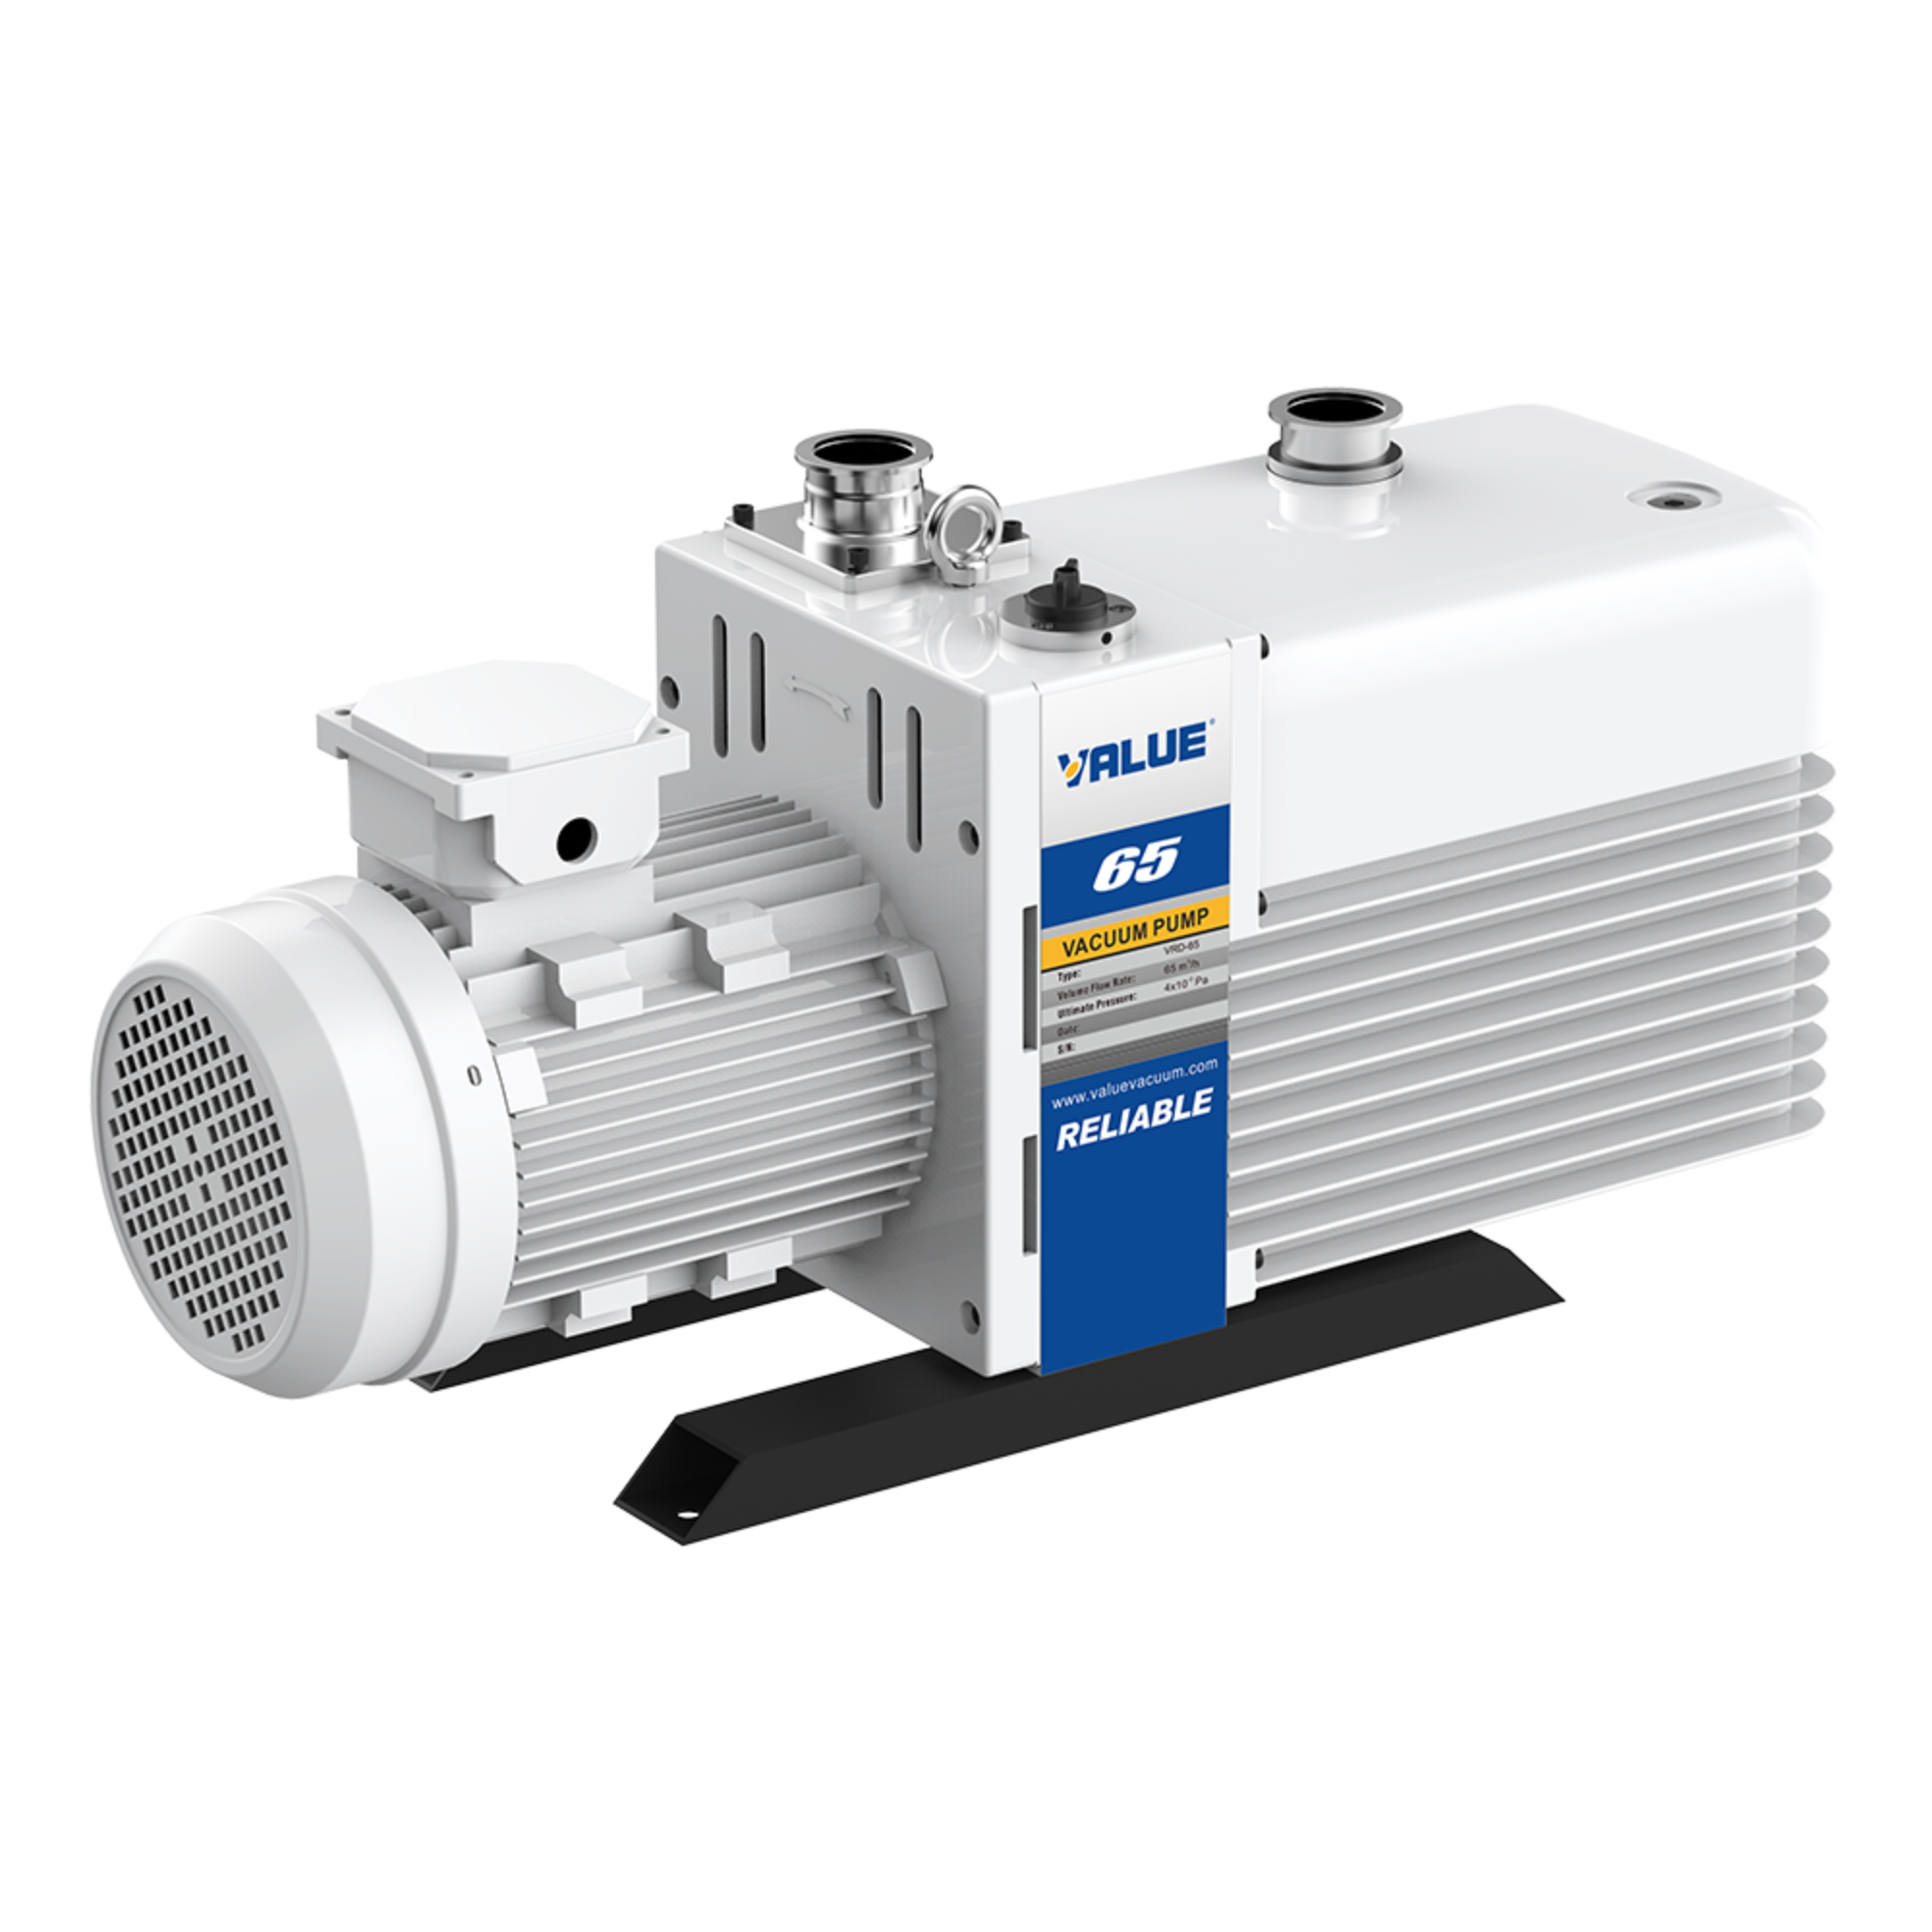 VRD-65 380V 65-78m³/h 1.5Pa Industrial two stage rotary vane vacuum pump